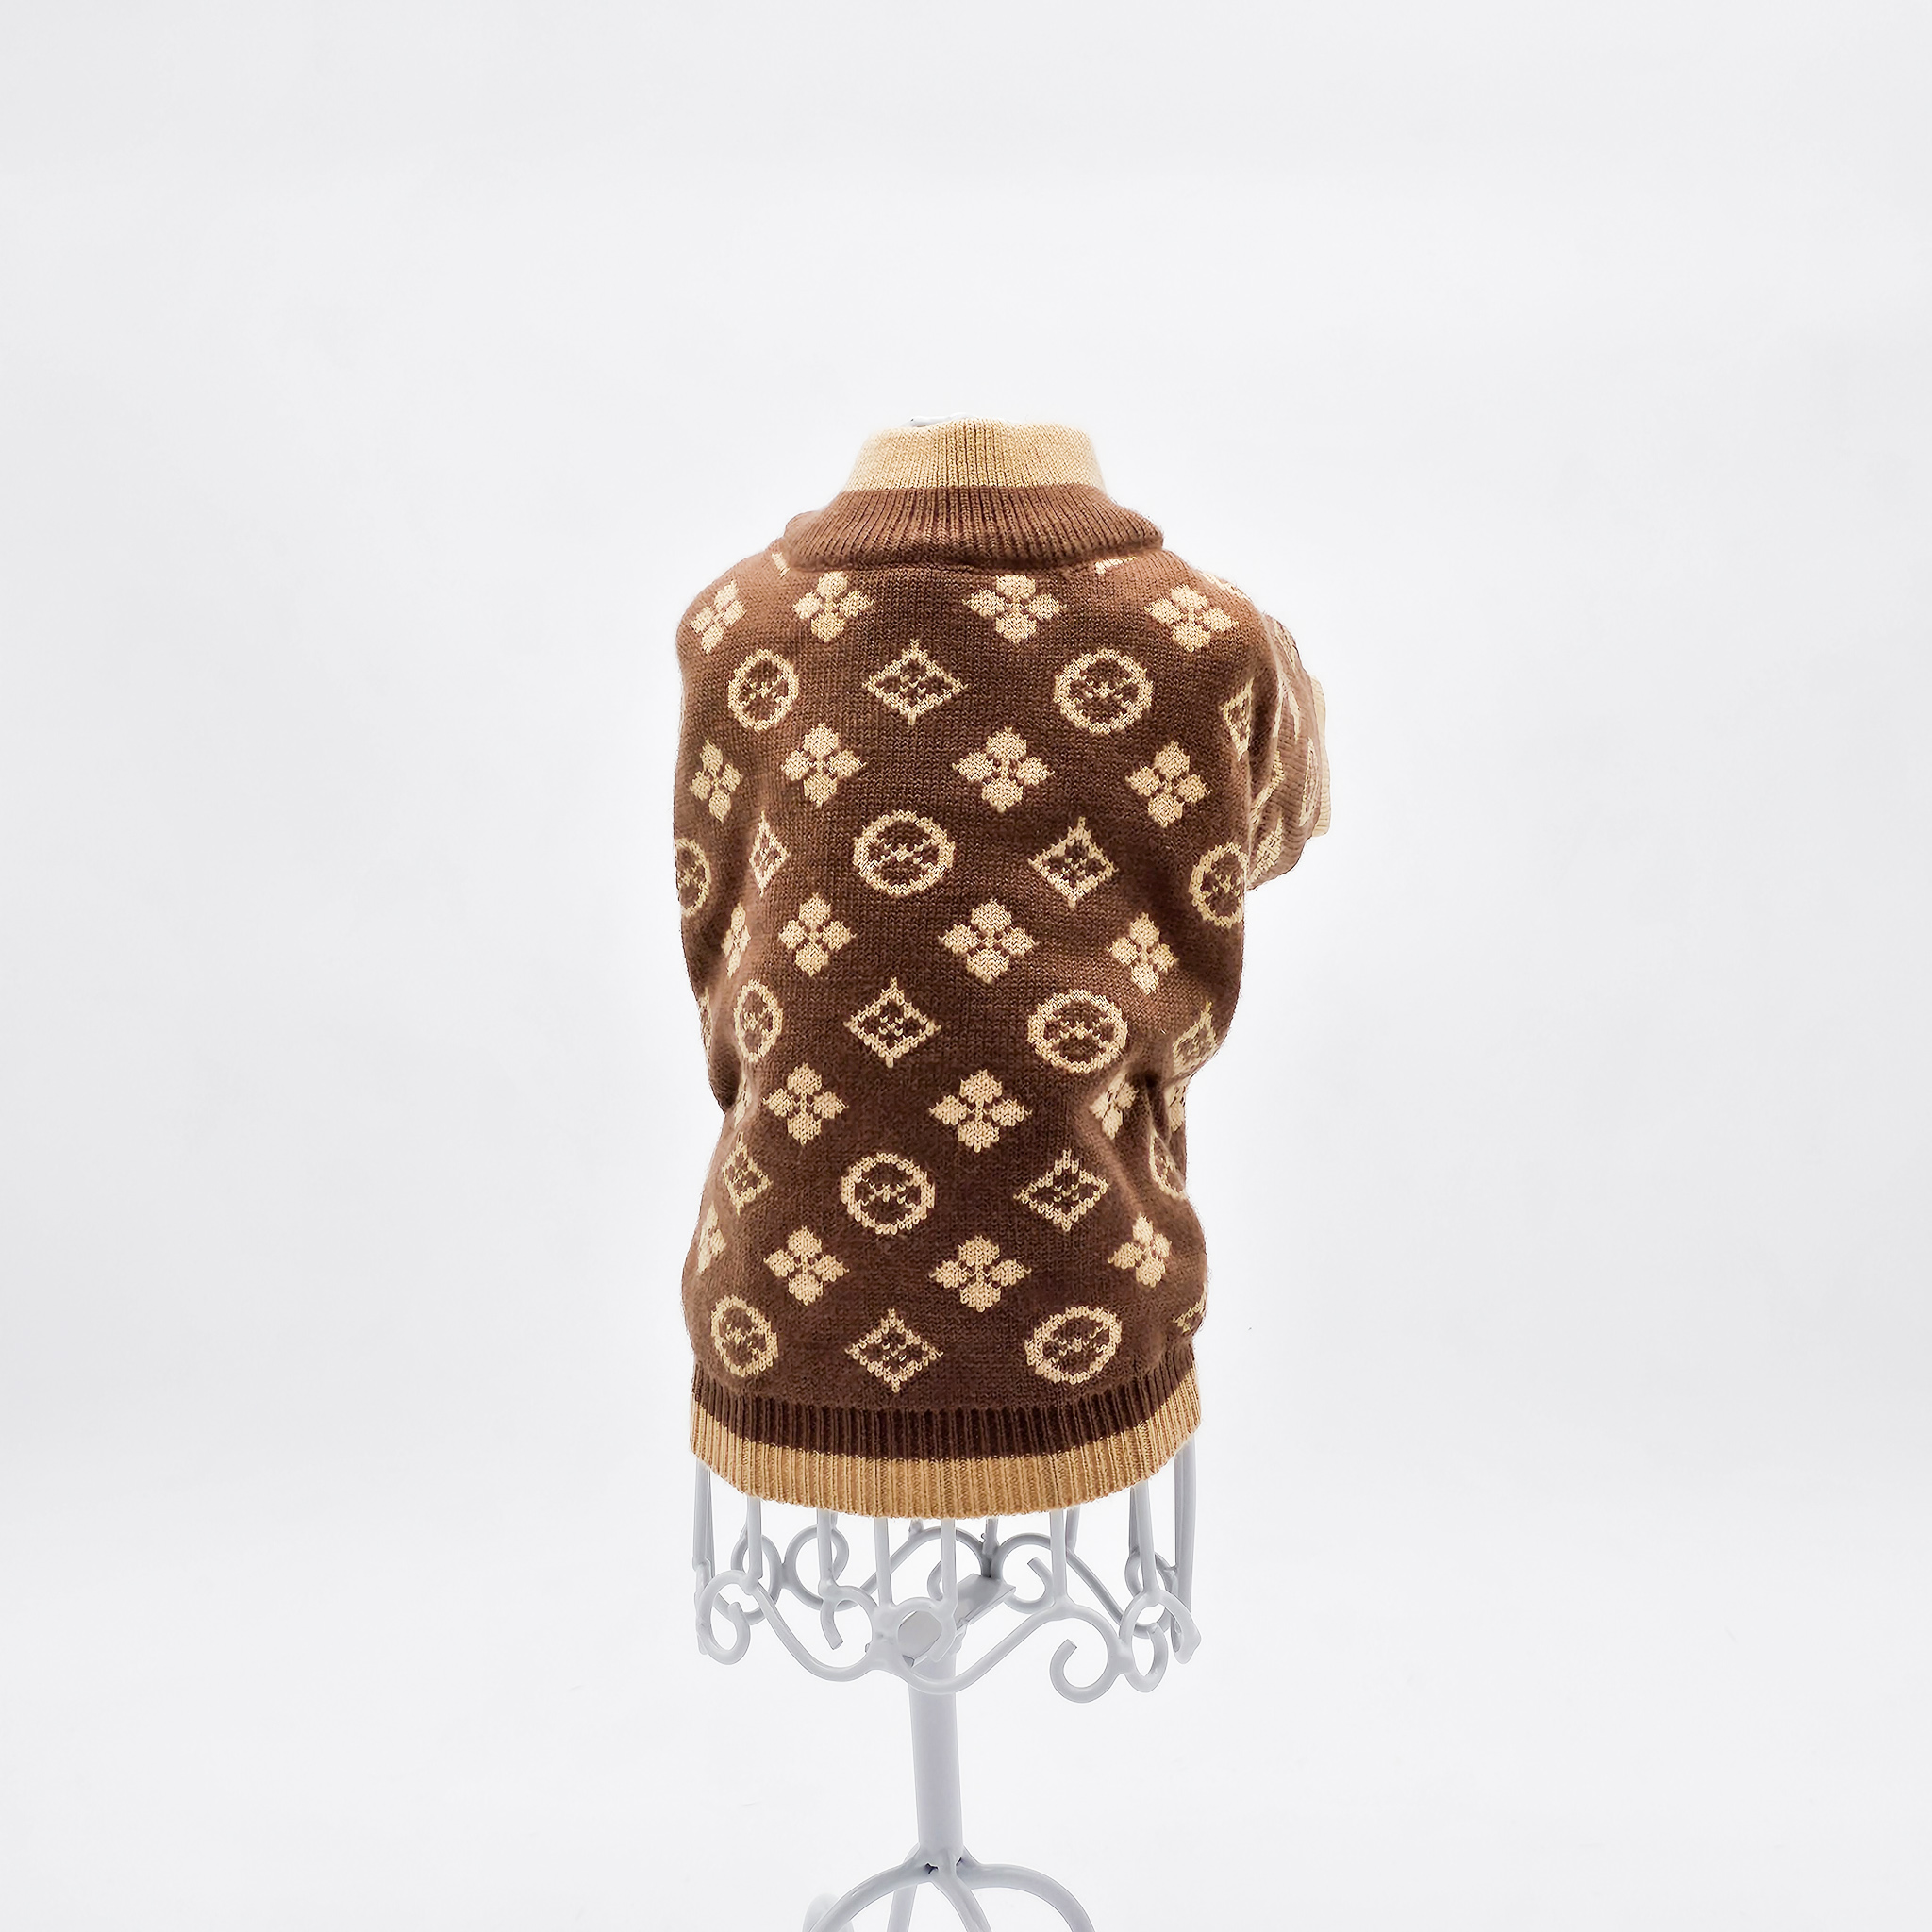 Elevate your pup's style with The Chi Society's Louis Vuitton inspired dog sweater. Back